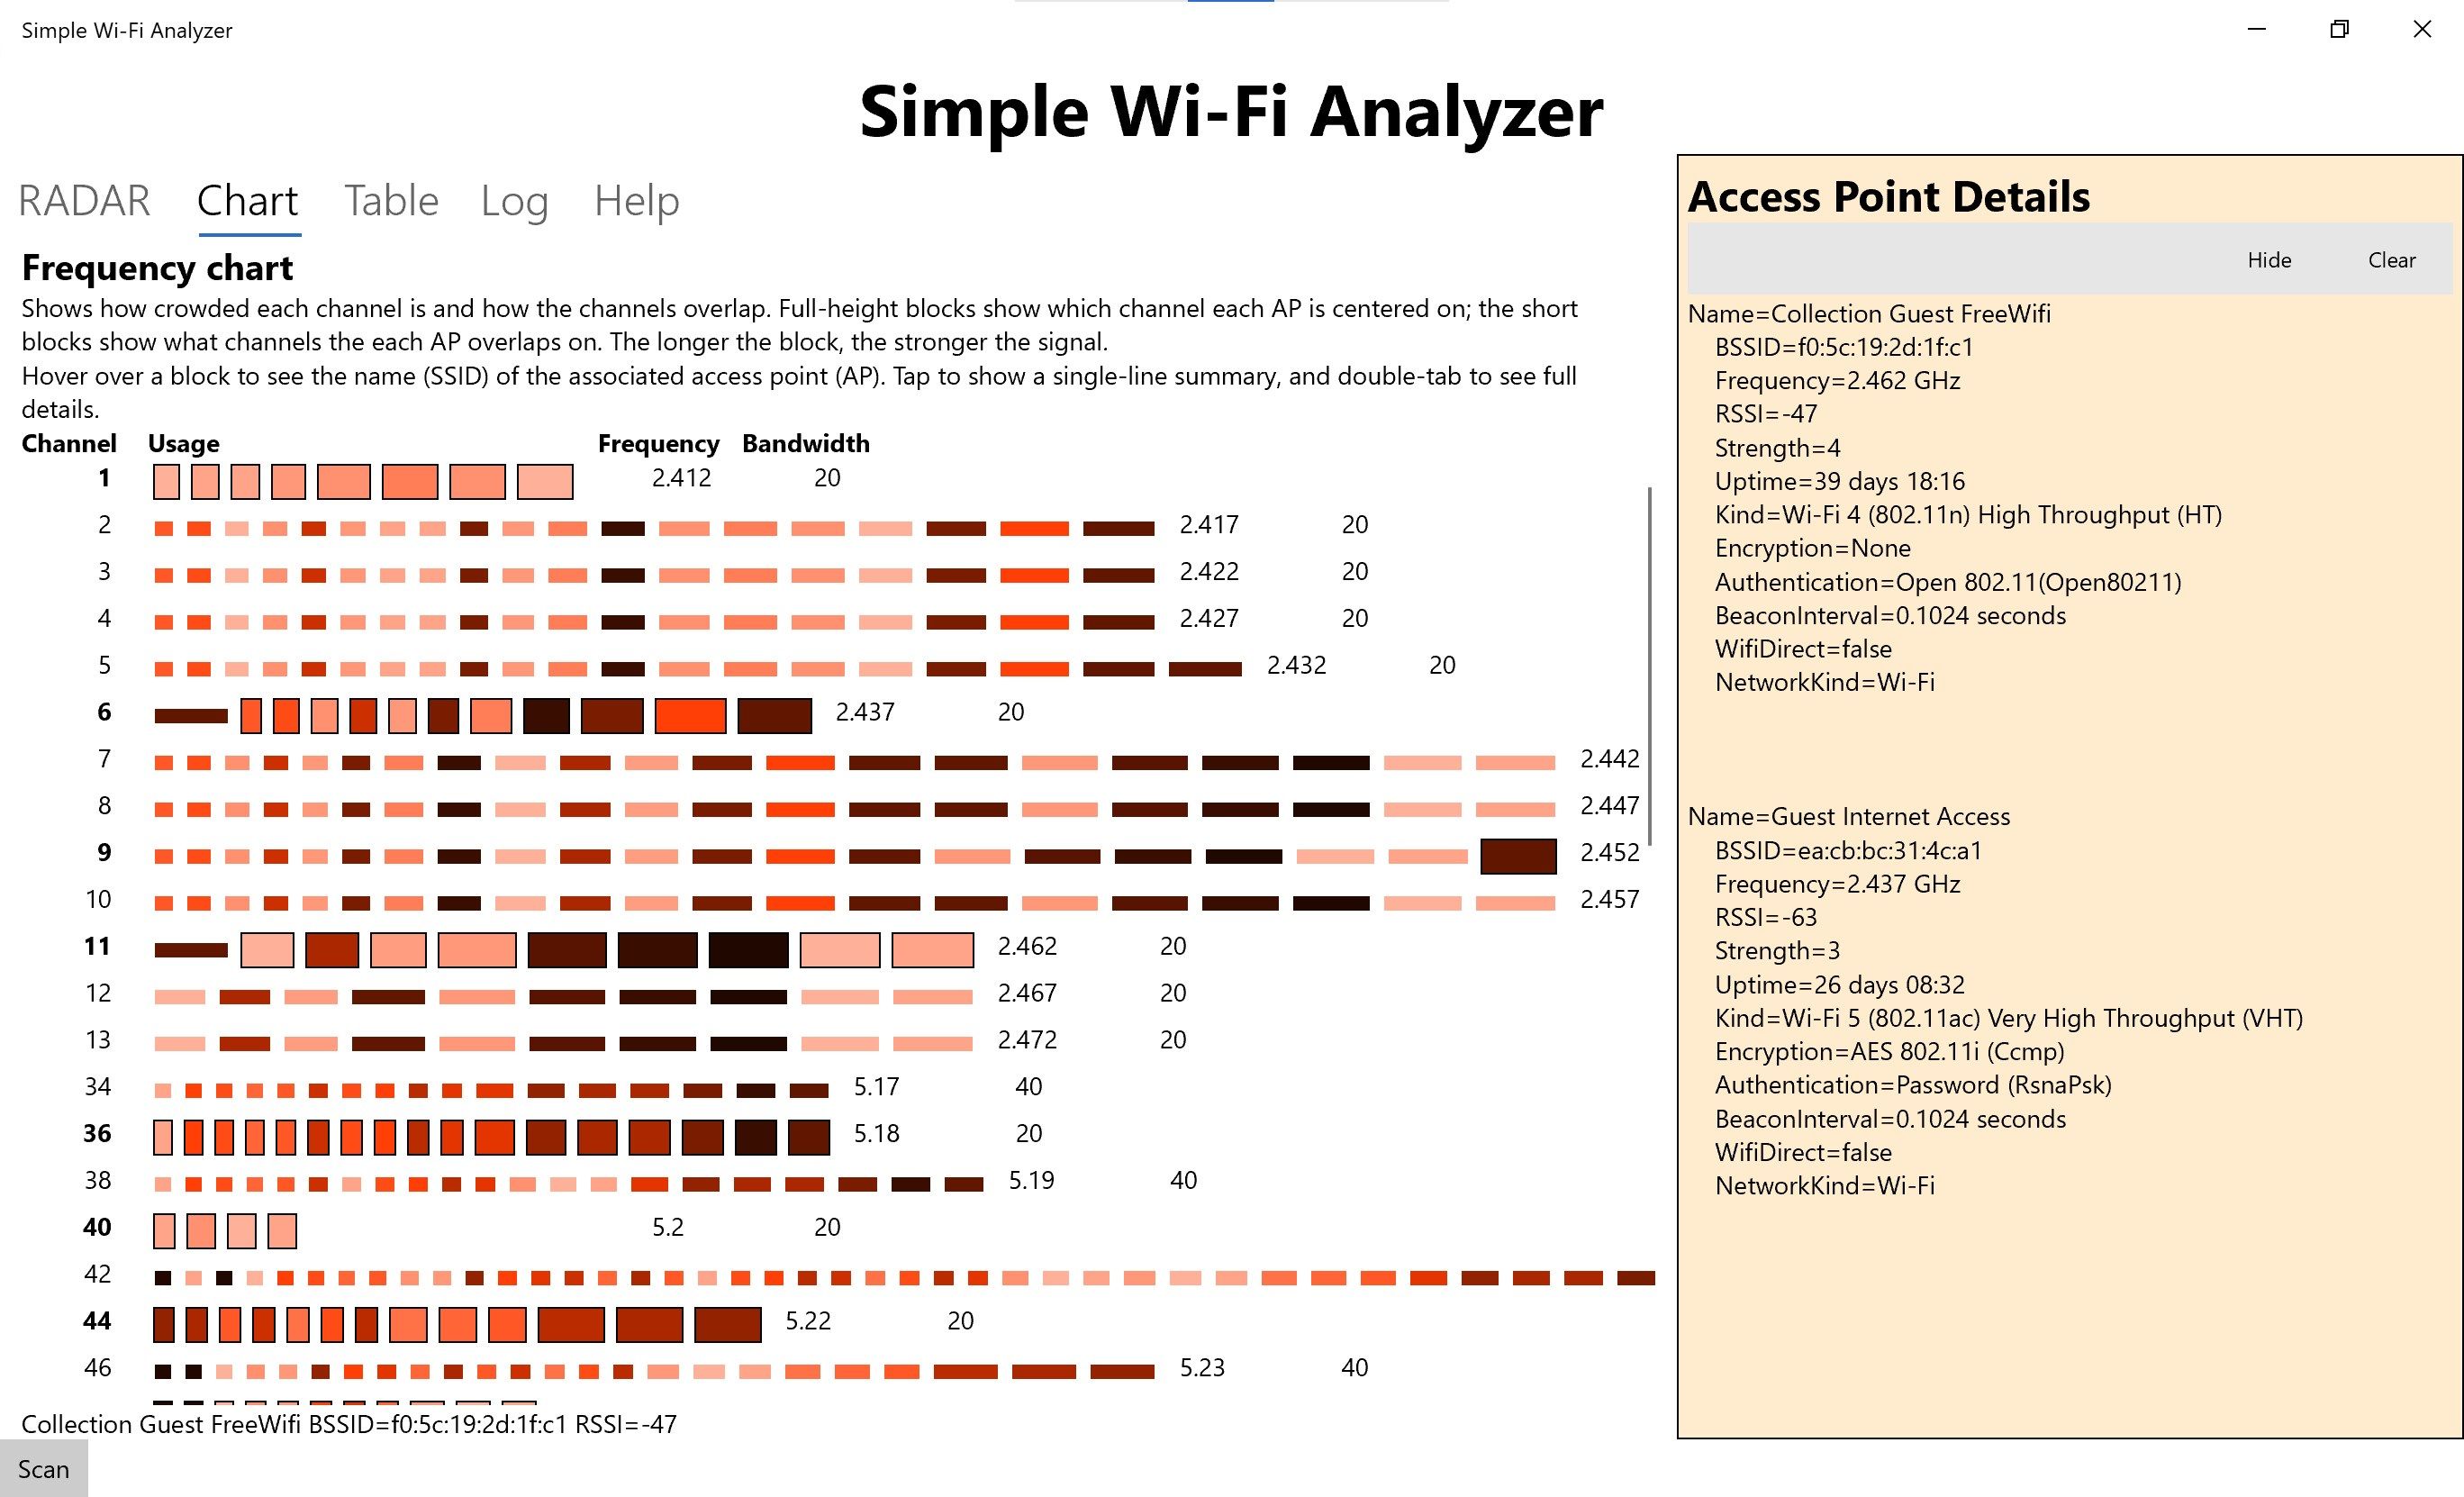 Chart display shows how crowded each Wi-Fi channel is